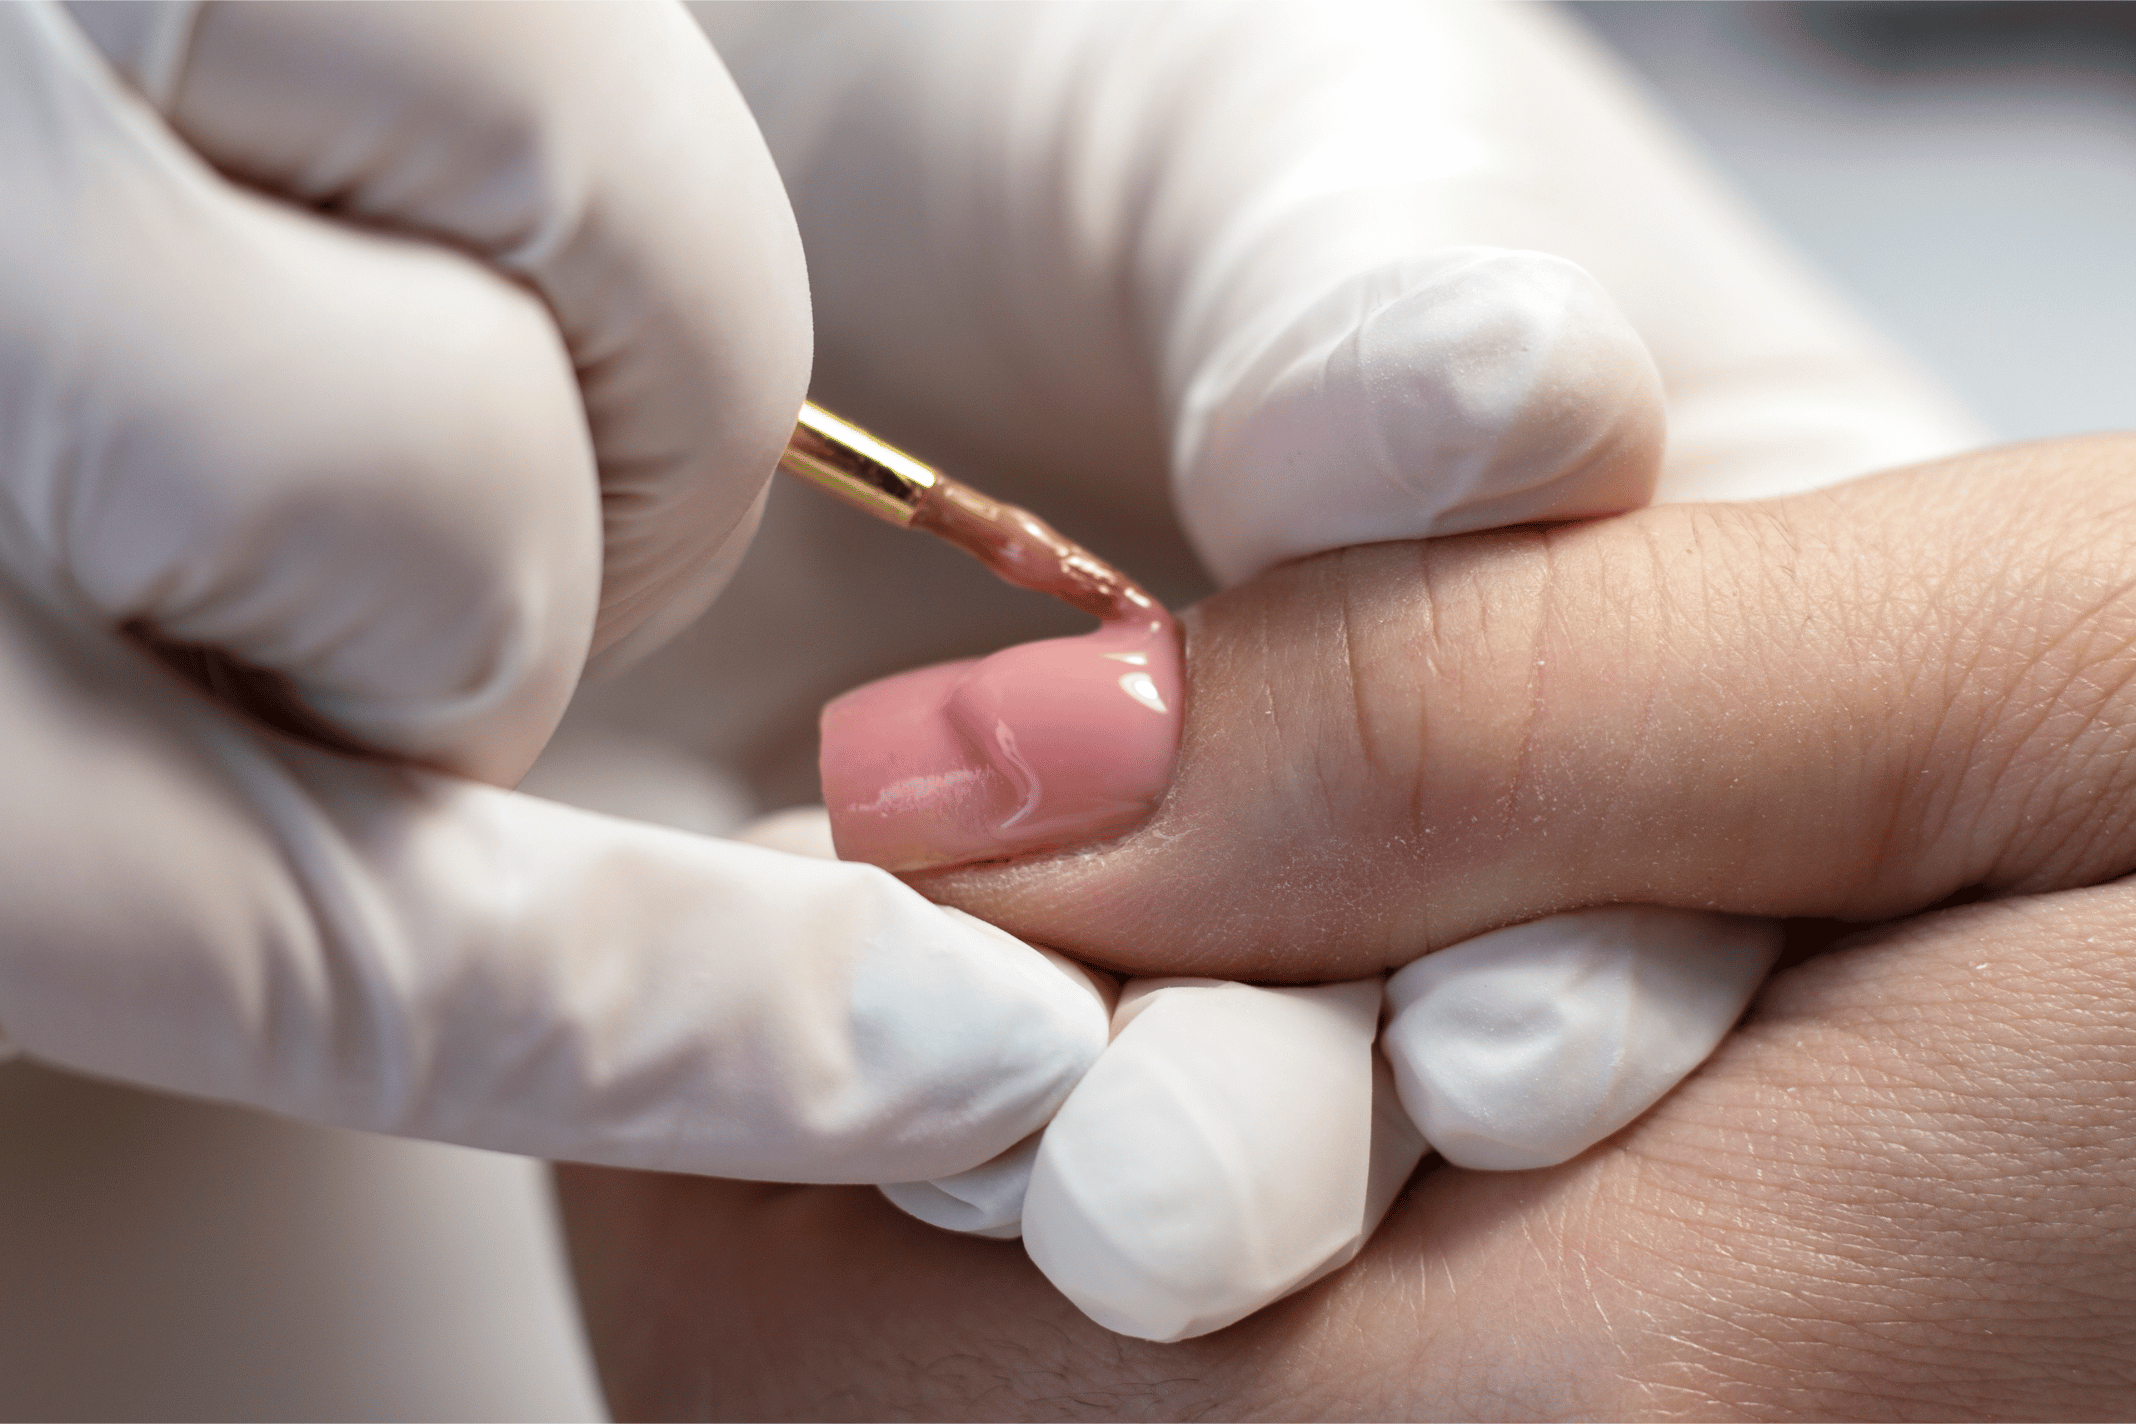 Gel polish being applied to a nail